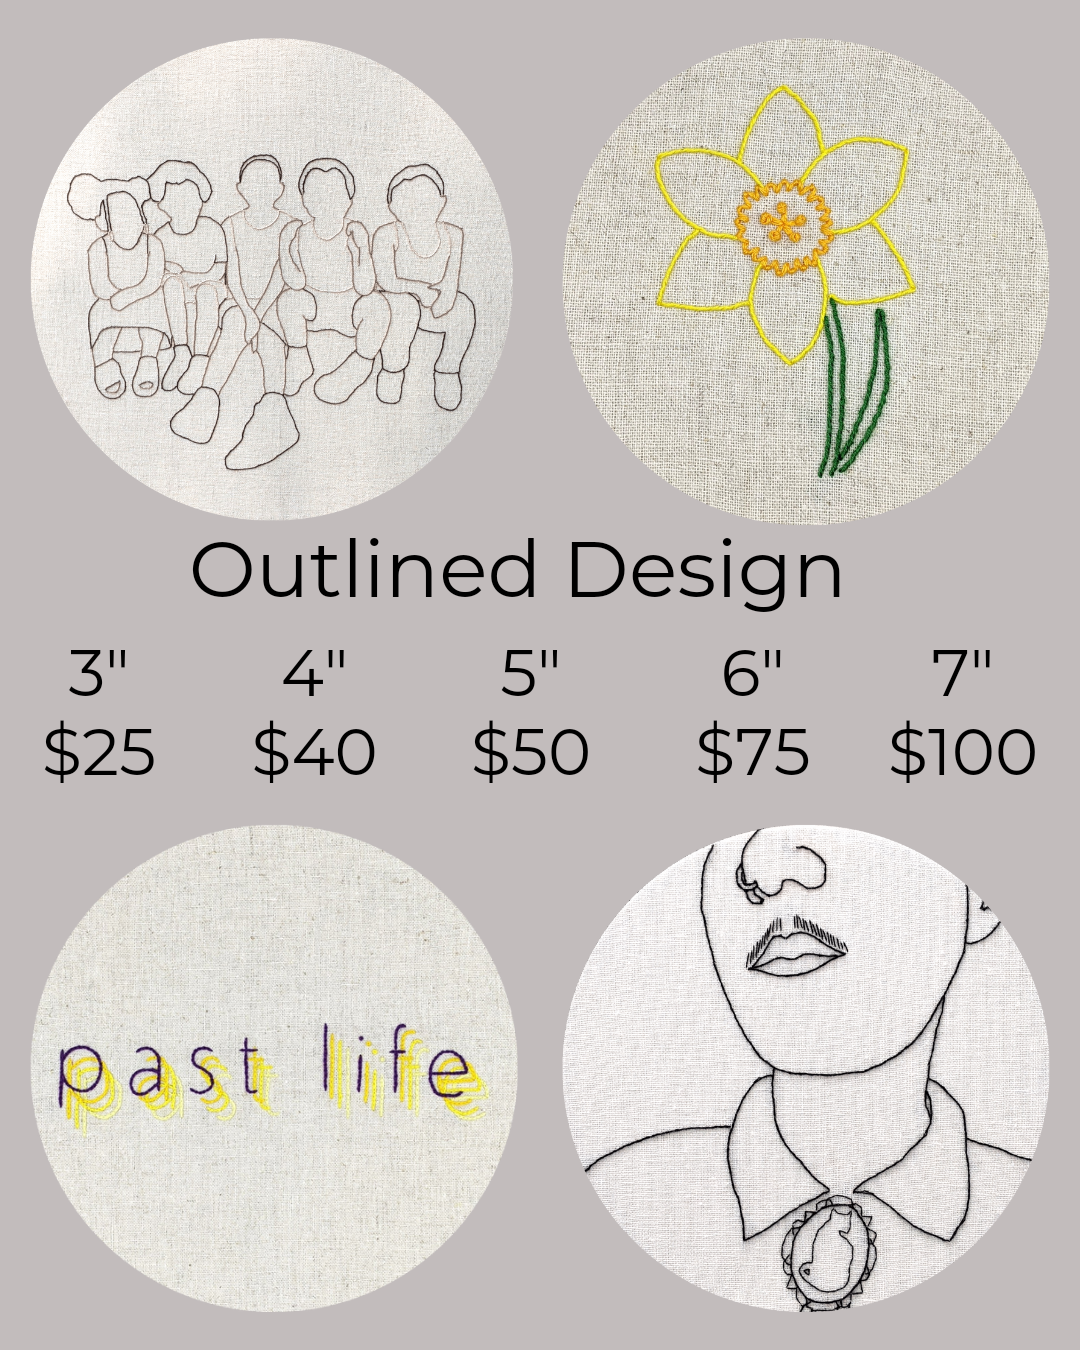 Outlined design: 3" for $25, 4" for $40, 5" for $50, 6" for $75, 7" for $100